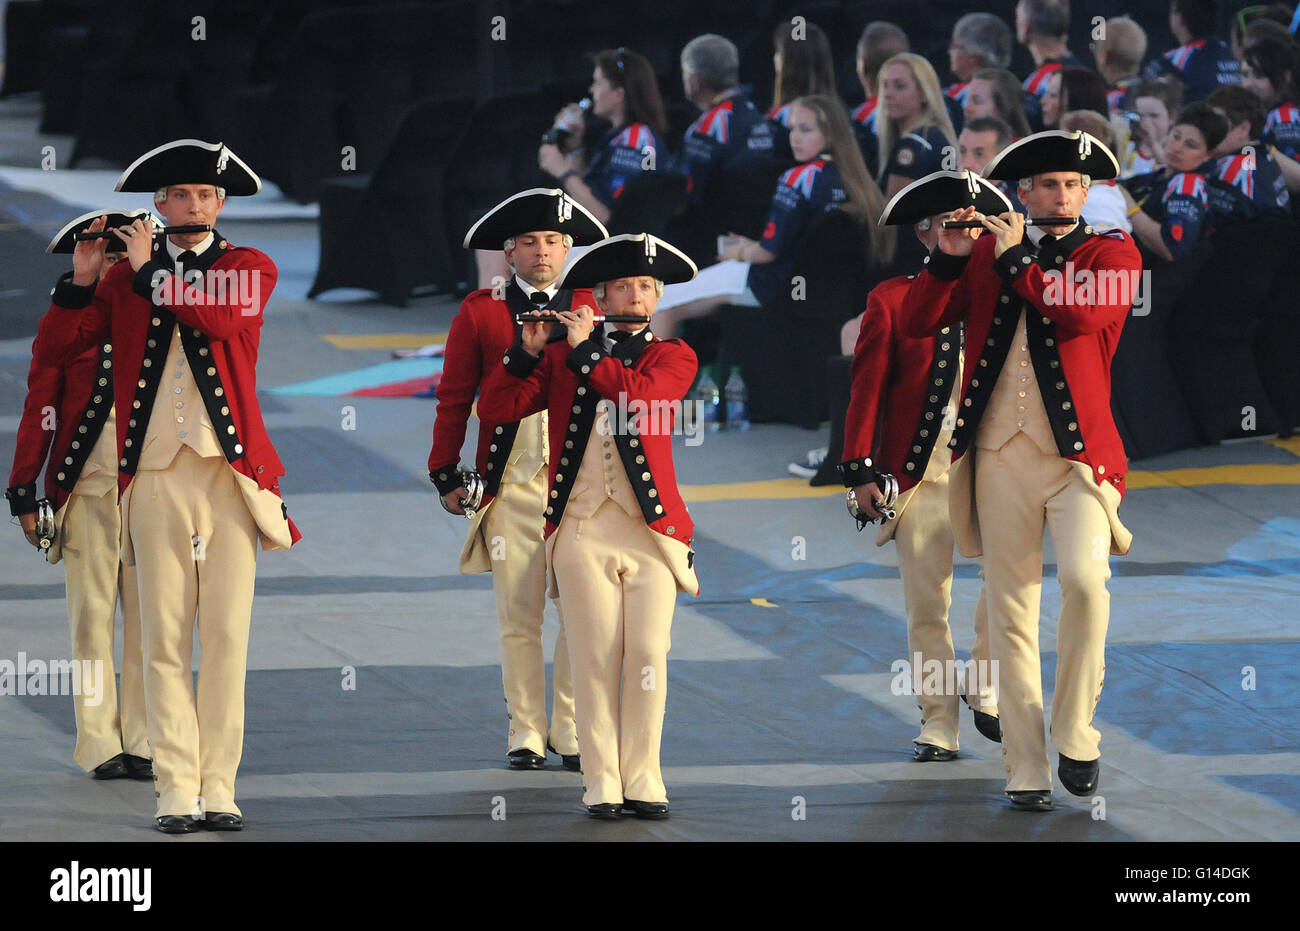 Orlando, Florida, United States. 8th May, 2016. Members of the U.S. Army Old Guard Fife and Drum Corps perform during the opening ceremony of the 2016 Invictus Games at Champion Stadium in the ESPN Wide World of Sports Complex at the Walt Disney World Resort in Orlando, Florida on May 8, 2016. The five day multi-sport event for wounded, injured, or sick armed services personnel includes 500 competitors from fourteen countries. Britain's Prince Harry launched the first Invictus Games in 2014 in London, England. Credit:  Paul Hennessy/Alamy Live News Stock Photo